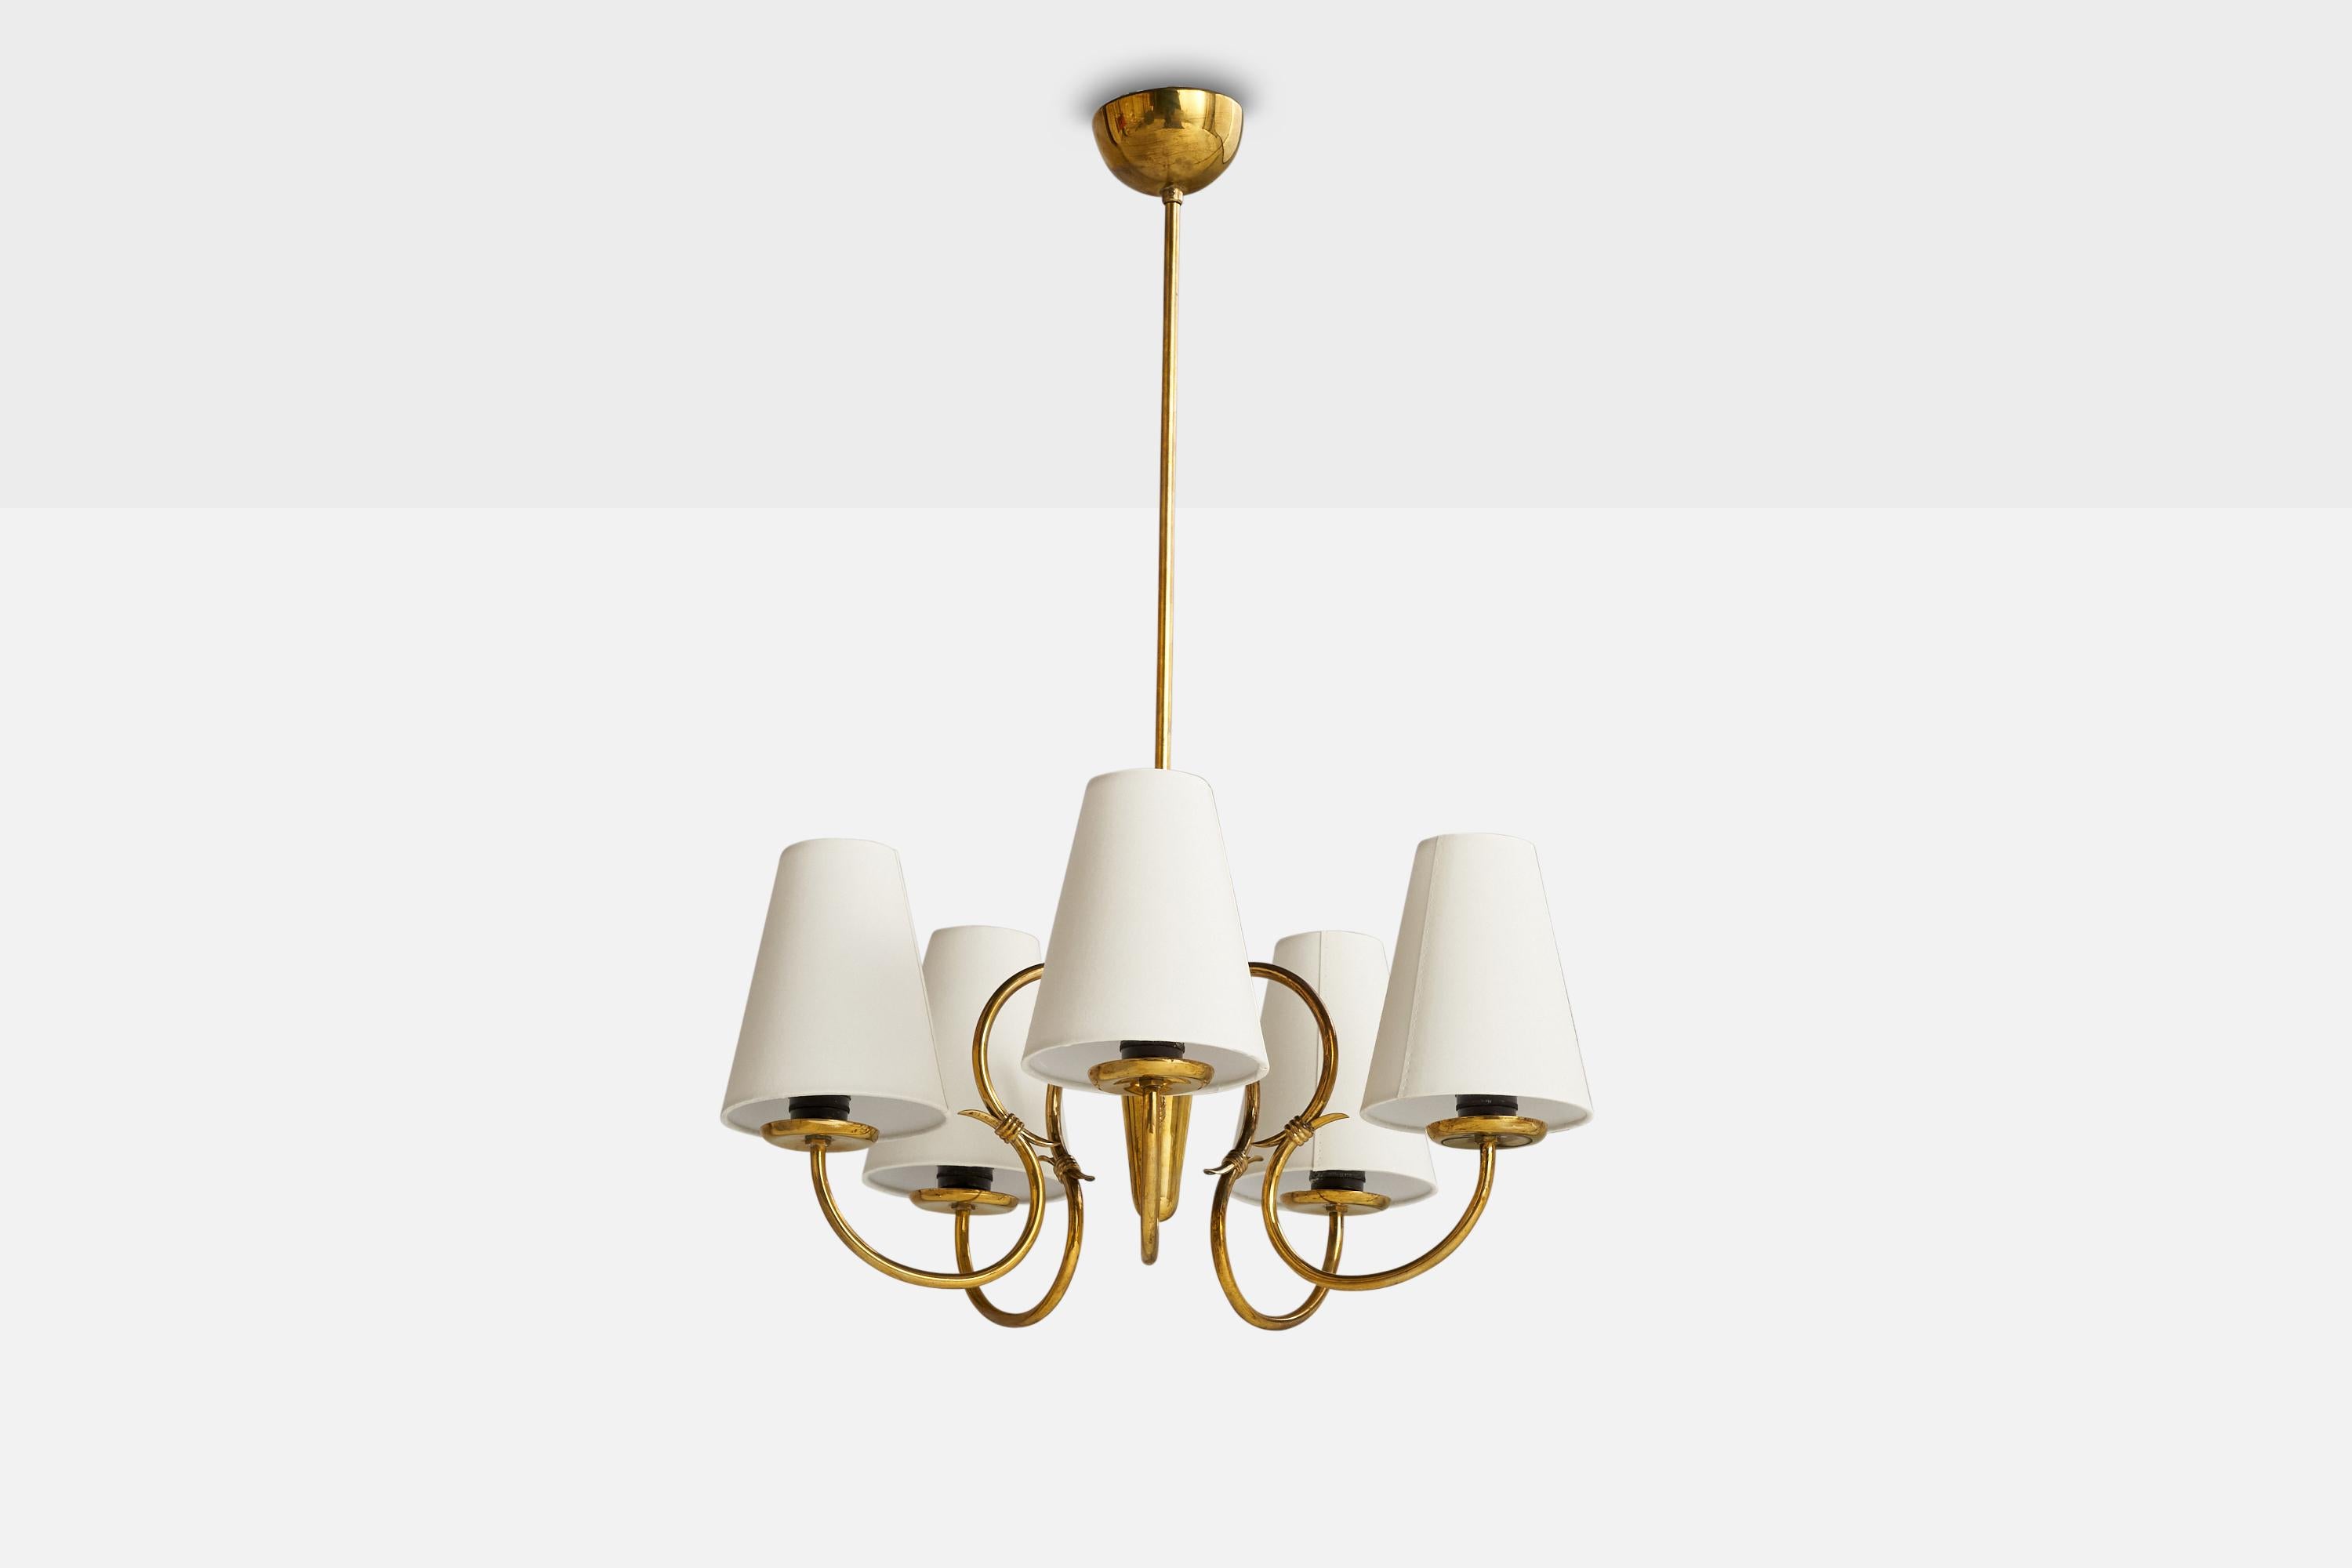 A brass and white fabric chandelier designed and produced in Sweden, 1940s.

Dimensions of canopy (inches): 3.25” H x 2.75”  Diameter
Socket takes standard E-26 bulbs. 5 sockets.There is no maximum wattage stated on the fixture. All lighting will be